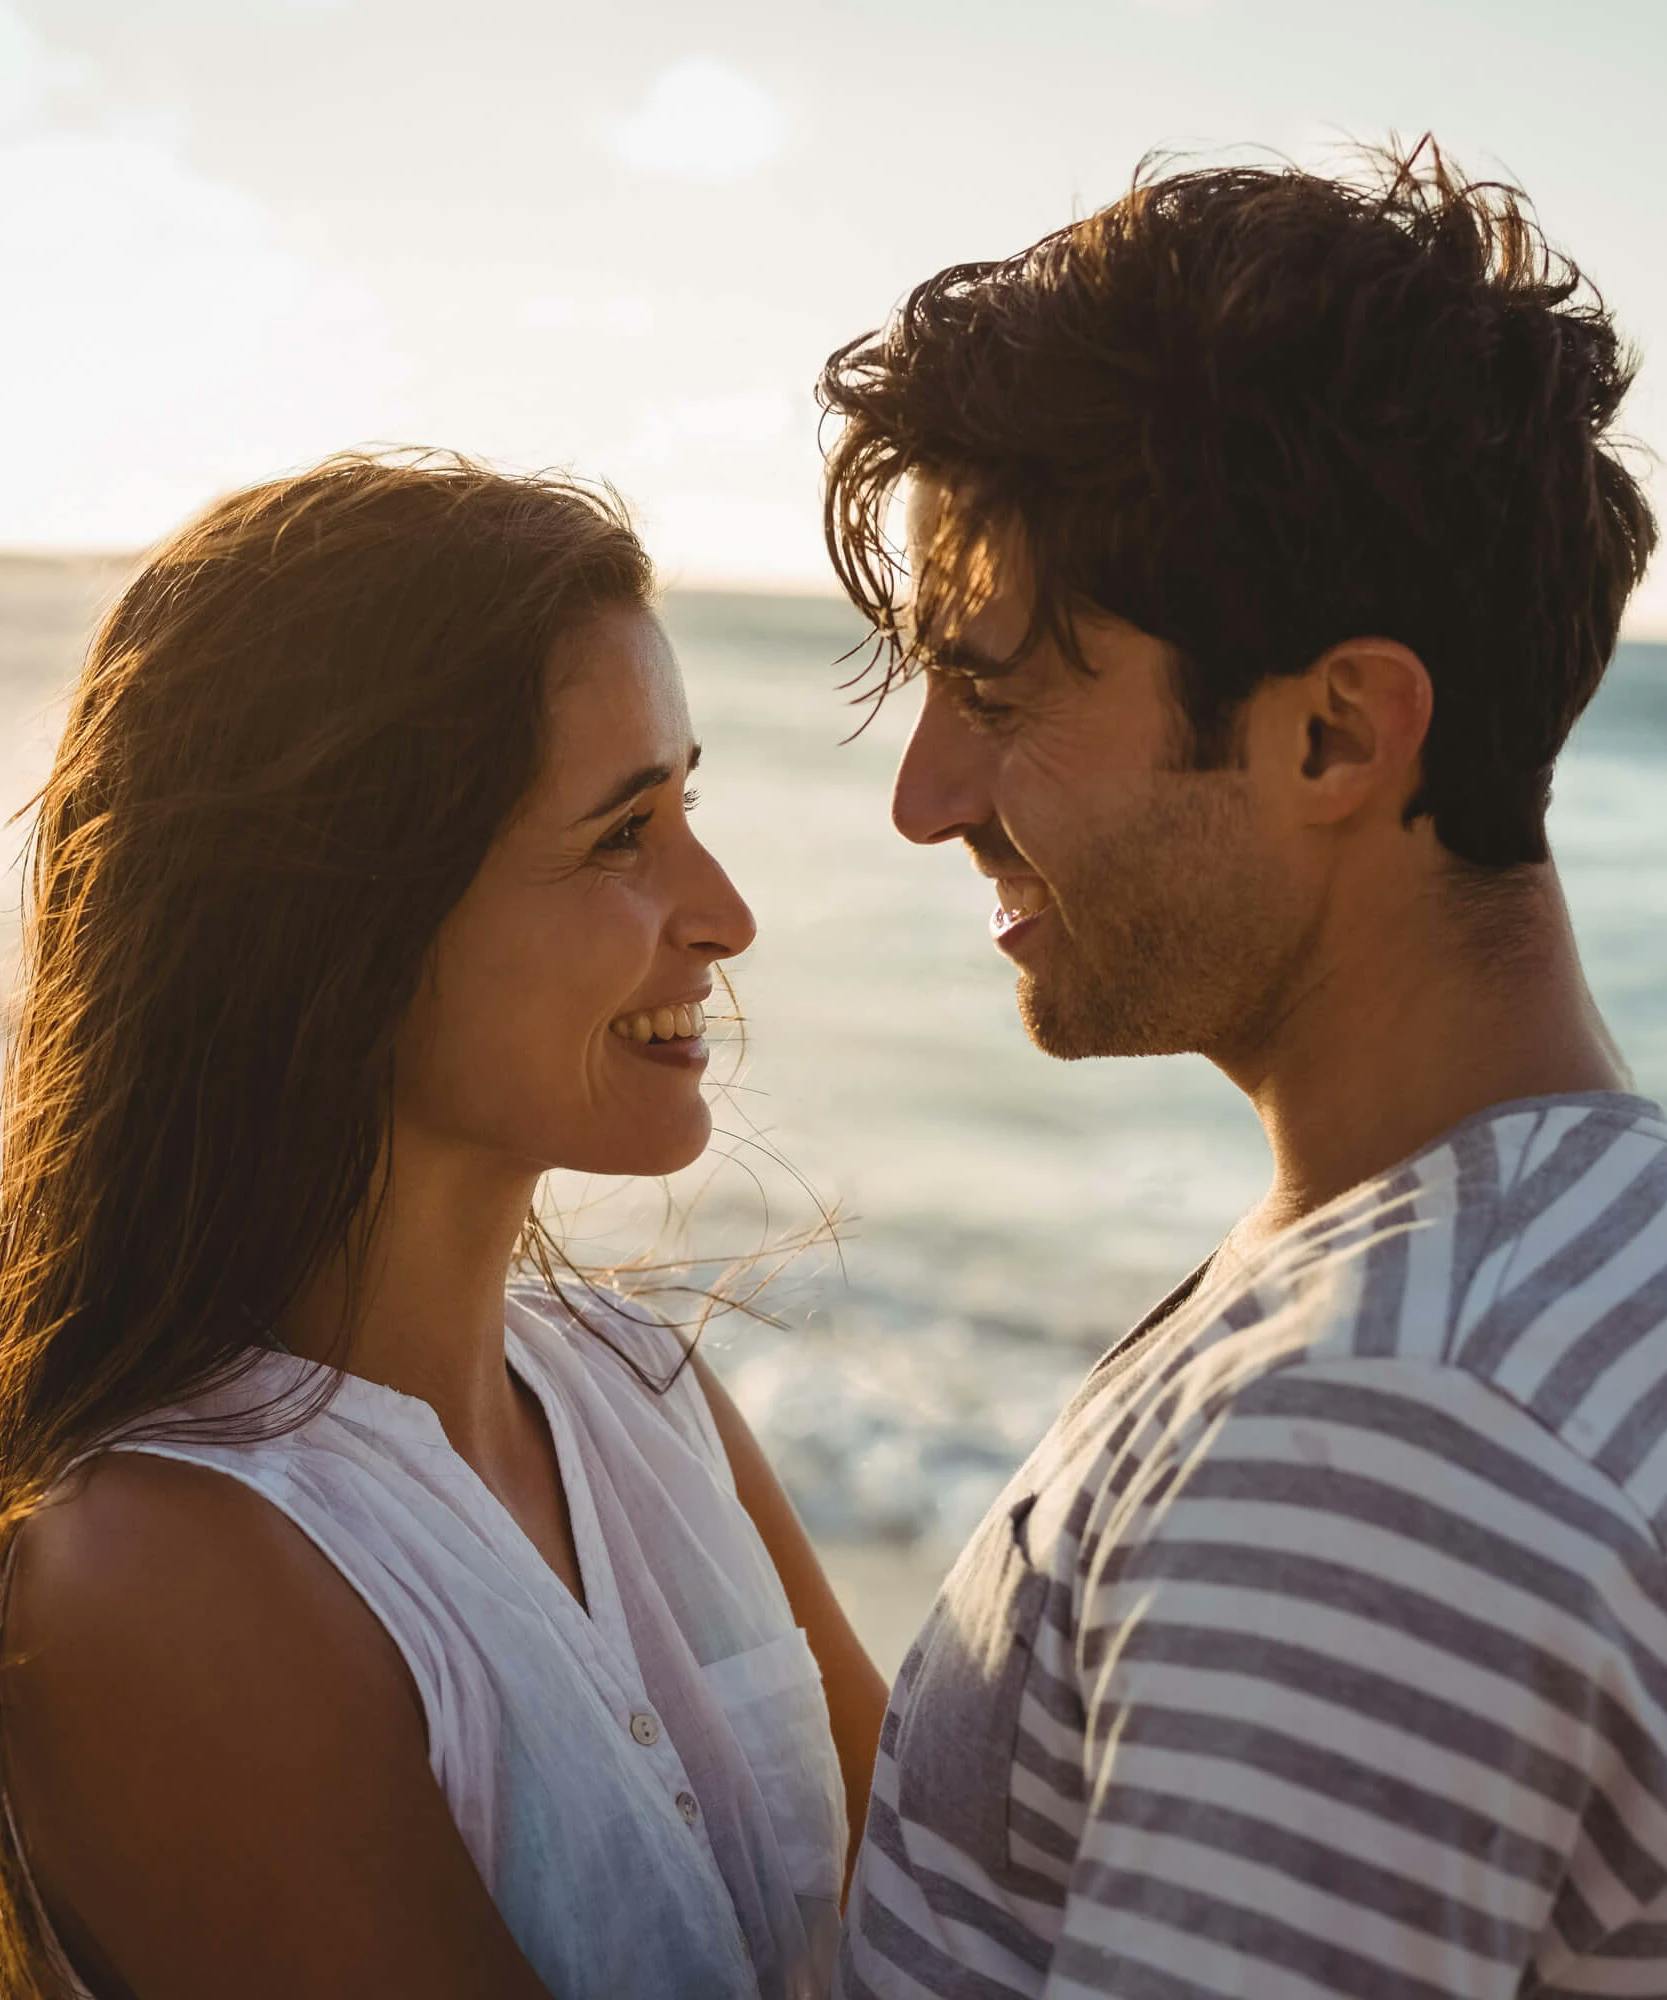 5 Things He Notices About You That Aren't Your Body